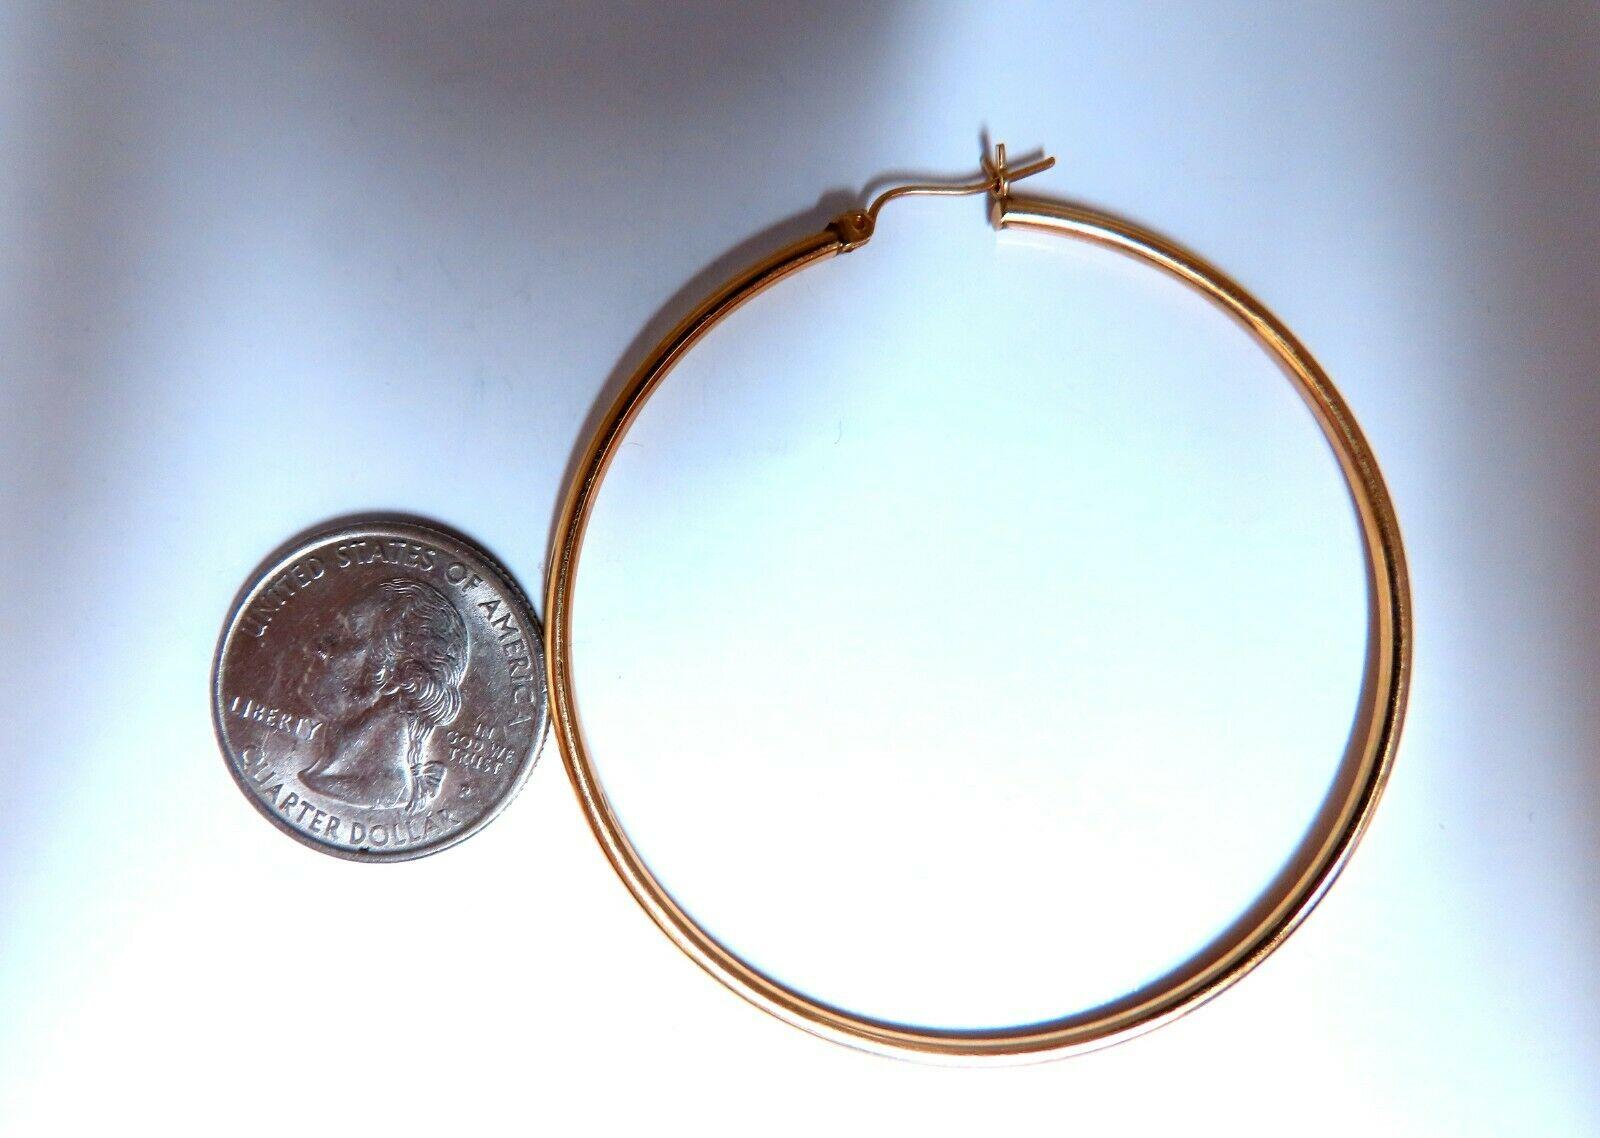 Gold Hoop Earrings

Measurements of Earrings:

2.3 inch wide 

2mm tube

4.4 grams / 14kt. yellow gold

Earrings are gorgeous made